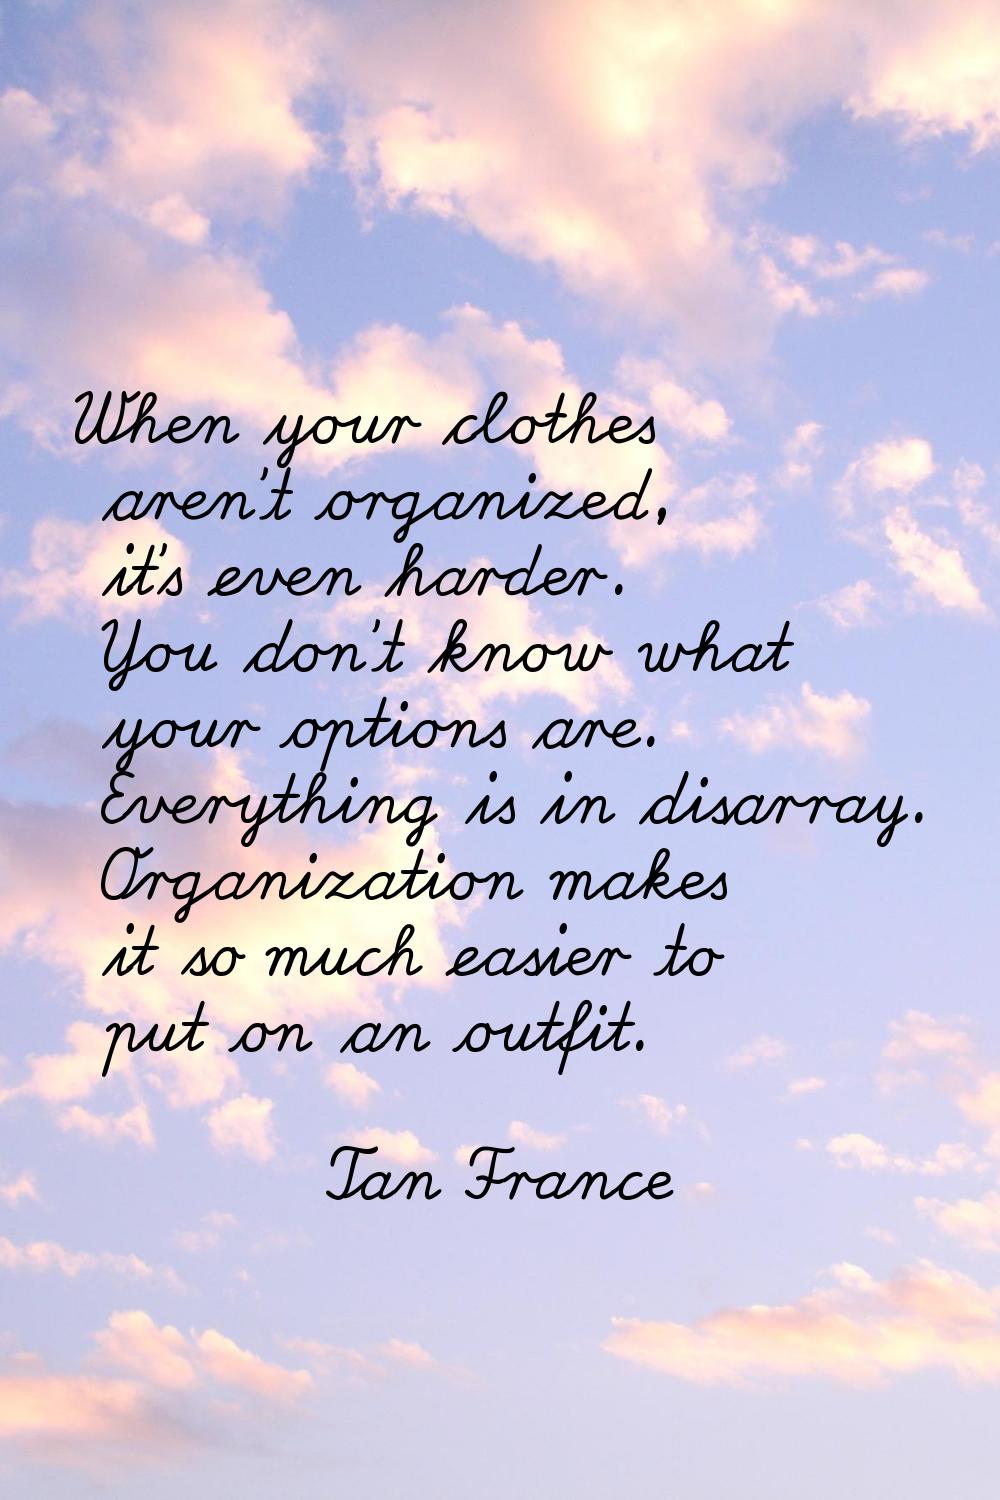 When your clothes aren't organized, it's even harder. You don't know what your options are. Everyth